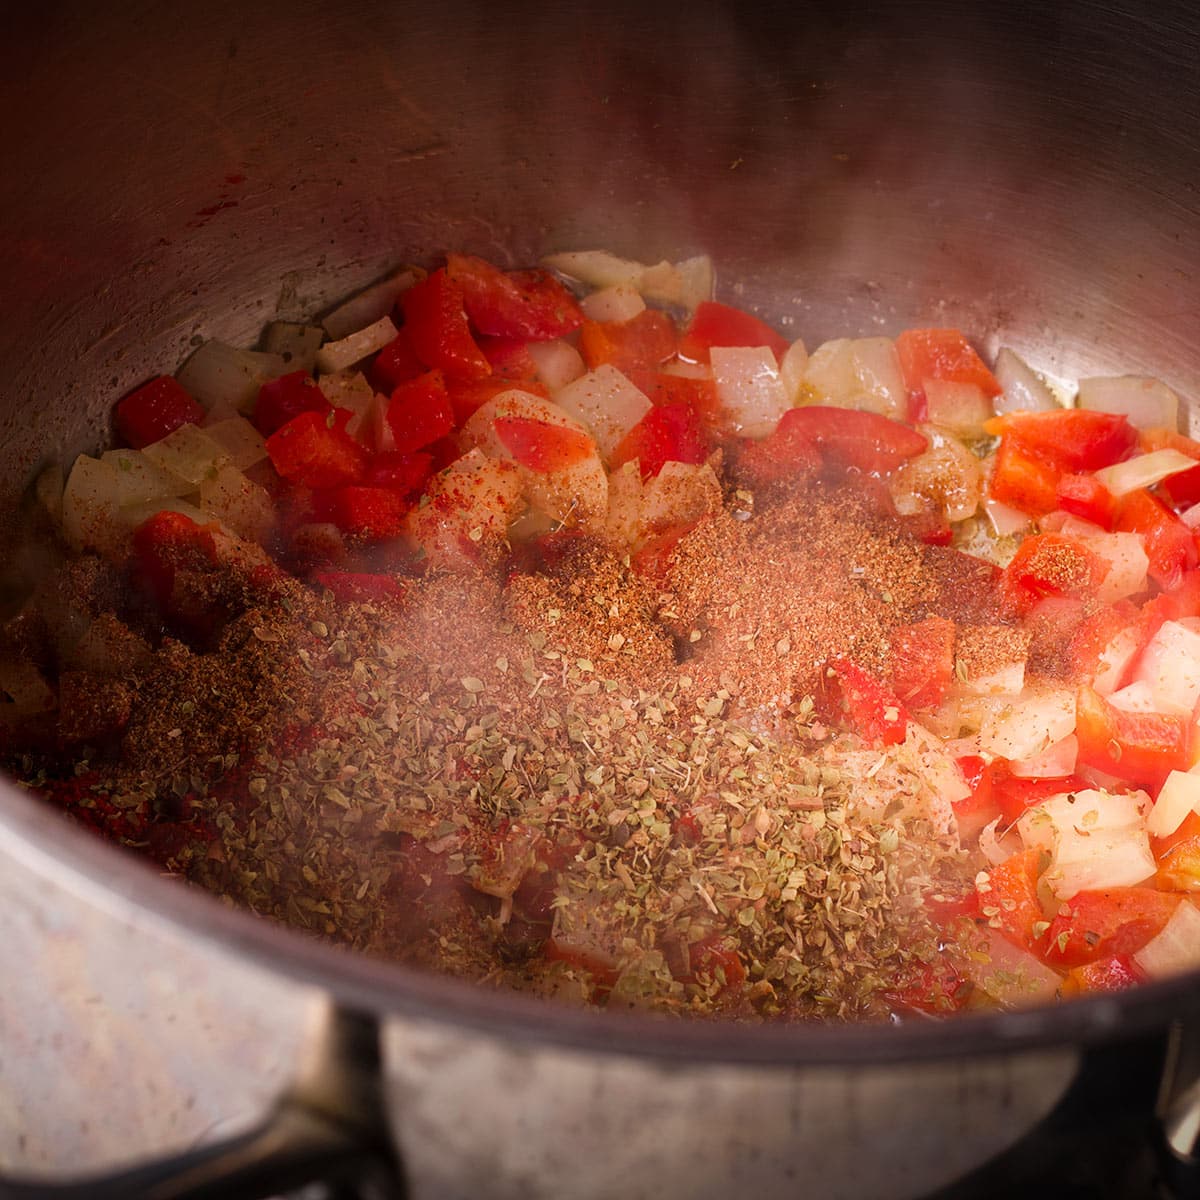 Add garlic, cumin, oregano, paprika, cayenne, salt and pepper to the onions and red bell pepper while they cook.